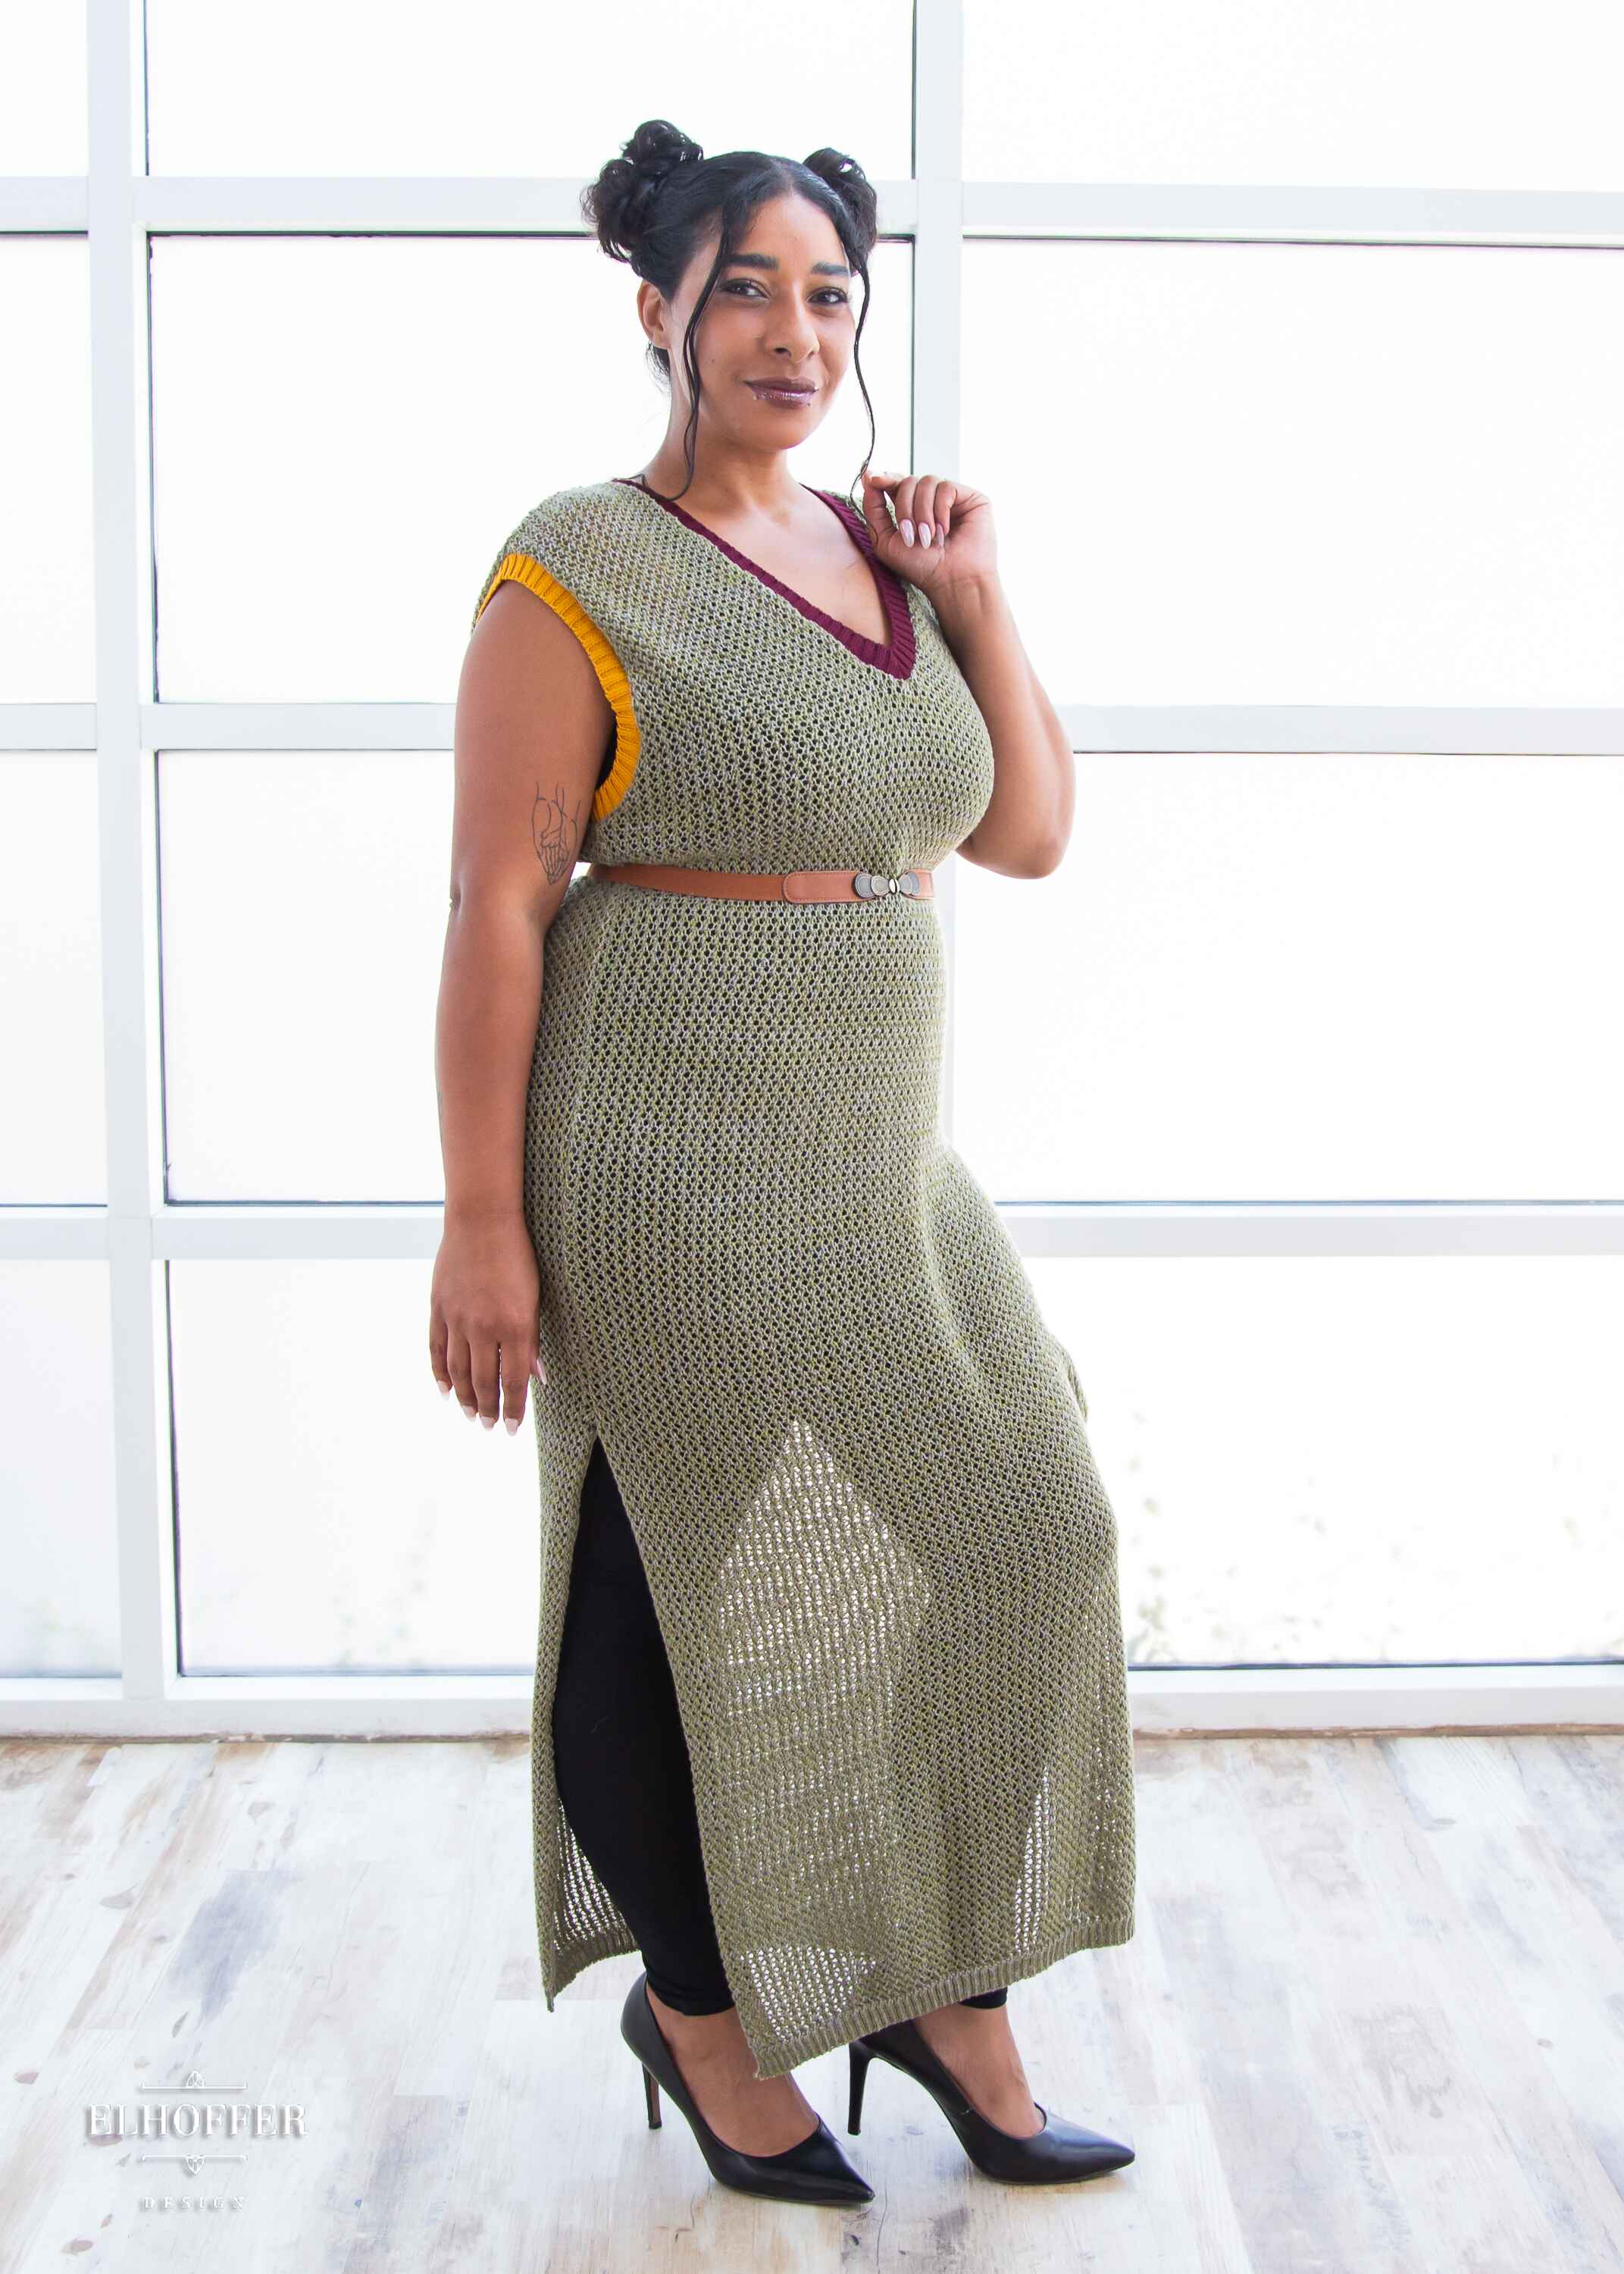 Janae, a light brown skinned L model with dark brown hair in space buns, is wearing a long reversible sleeveless loose knit cover up with side slits.  The main body is an olive green with one side plain knit with a v neck and the other side having a subtle skull design with a scoop neck, the neckline is trimmed in crimson red, and the armholes are trimmed in a yellow.